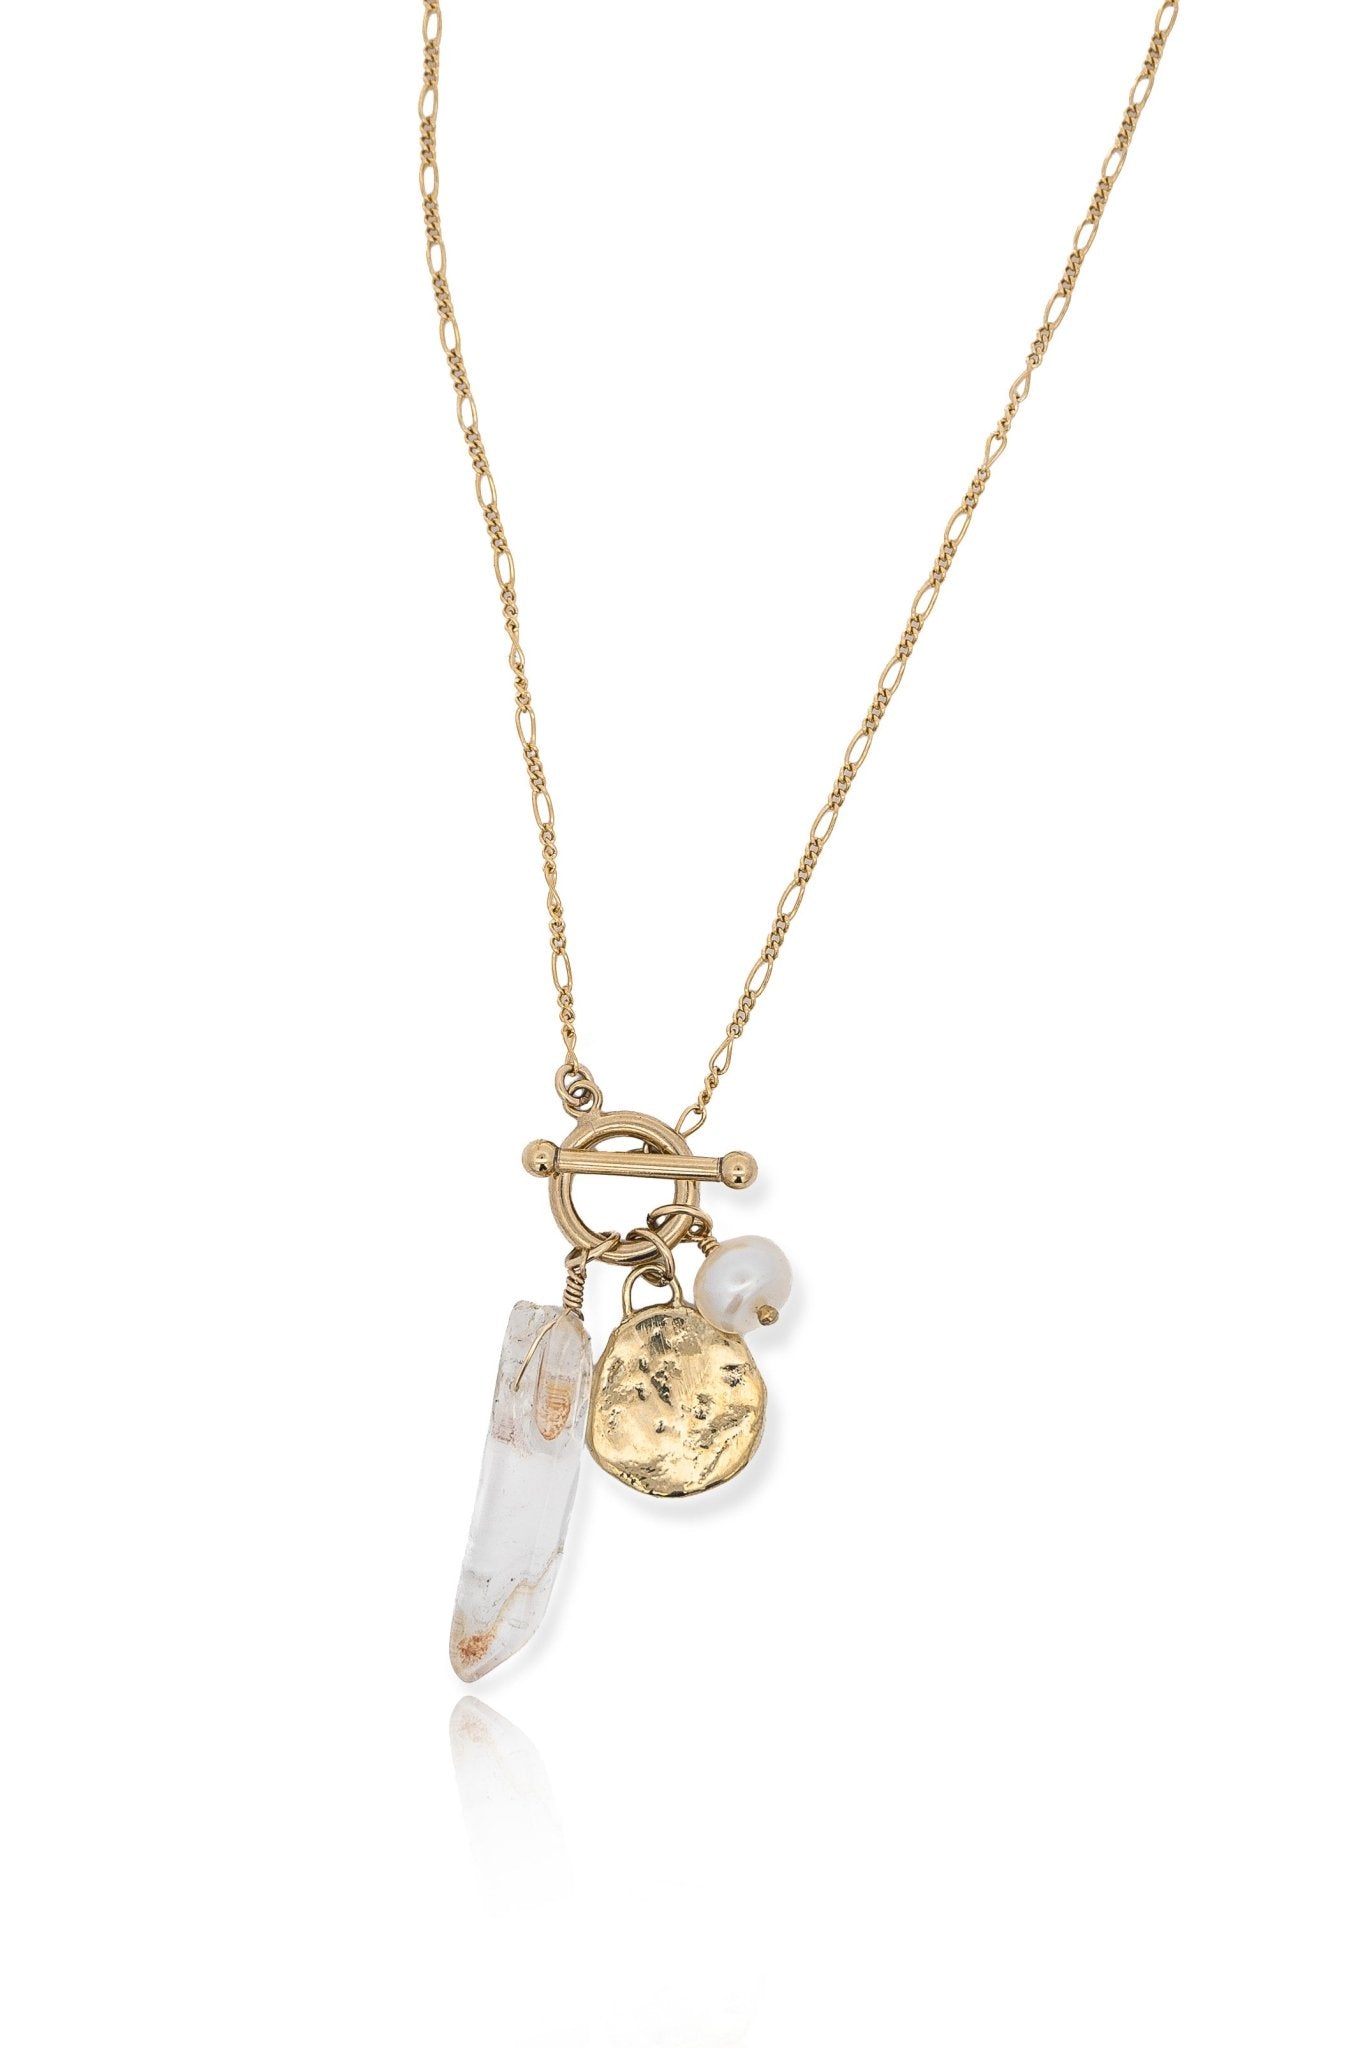 Selene Gold Charm Necklace with Pearl and Crystal - Dea Dia